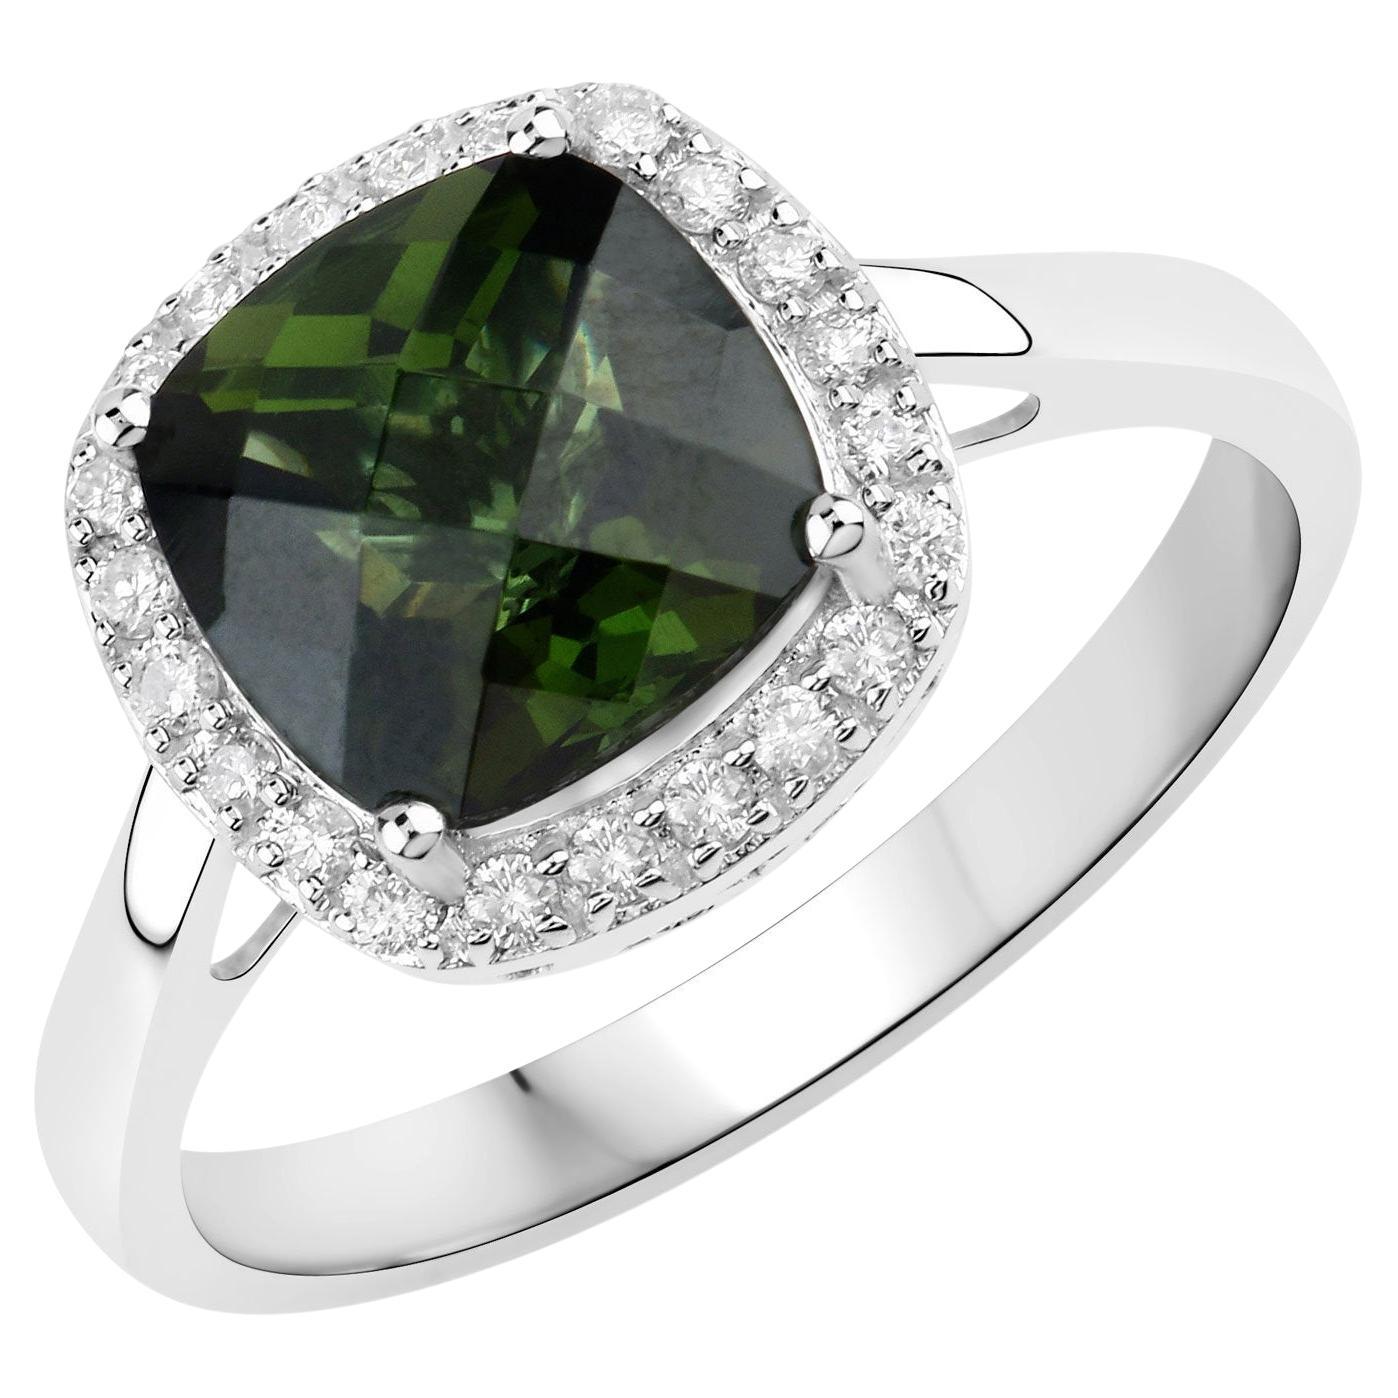 Natural 2.50 Carat Green Tourmaline Ring With Diamond Halo 14K White Gold For Sale